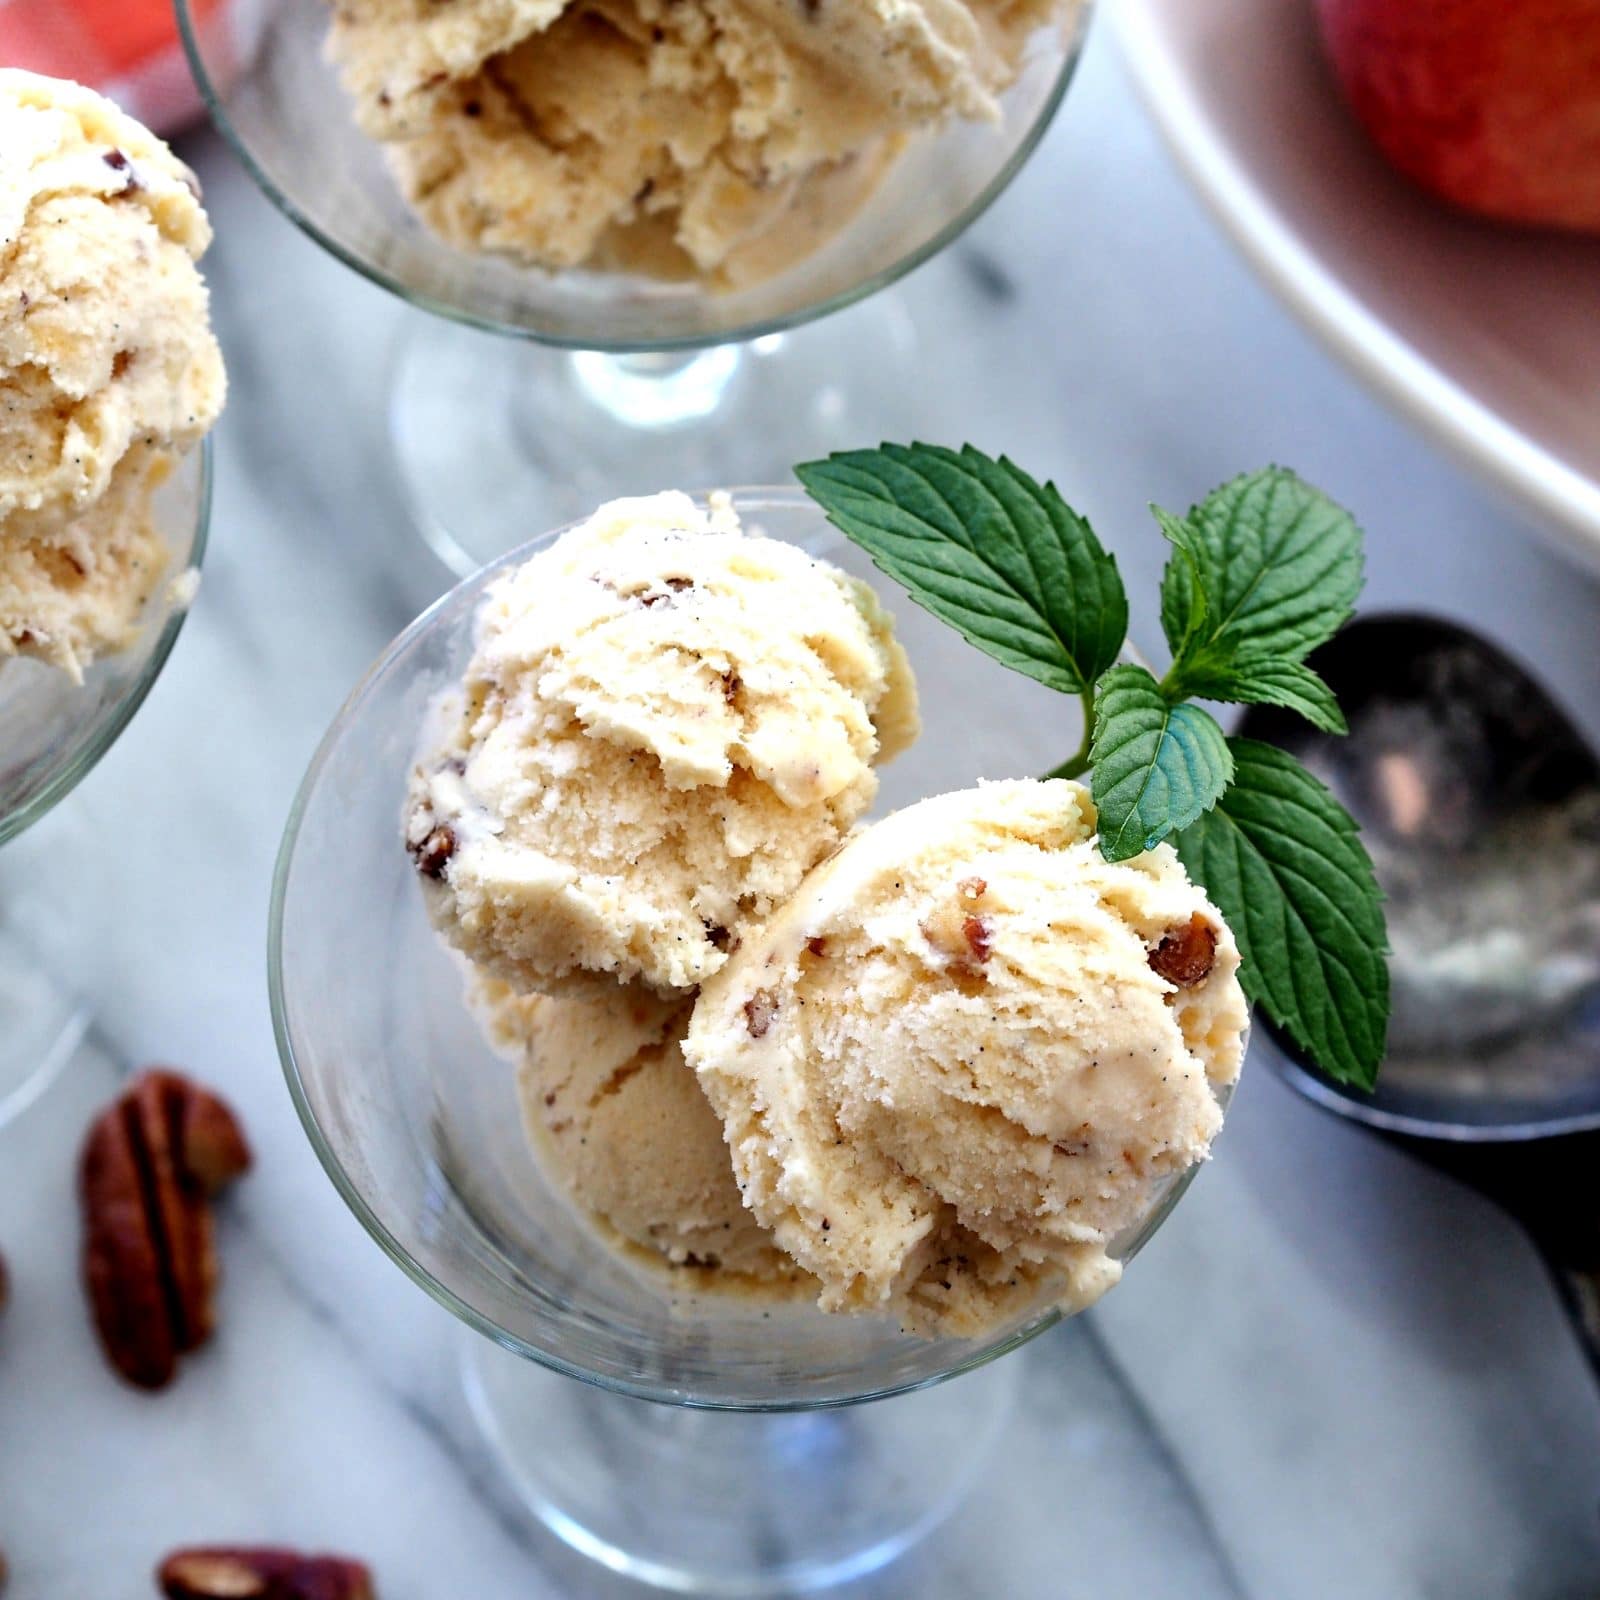 Butter Pecan Peach Ice Cream is peachy, crunchy, creamy, salty and sweet. It has something for everyone. www.simplysated.com